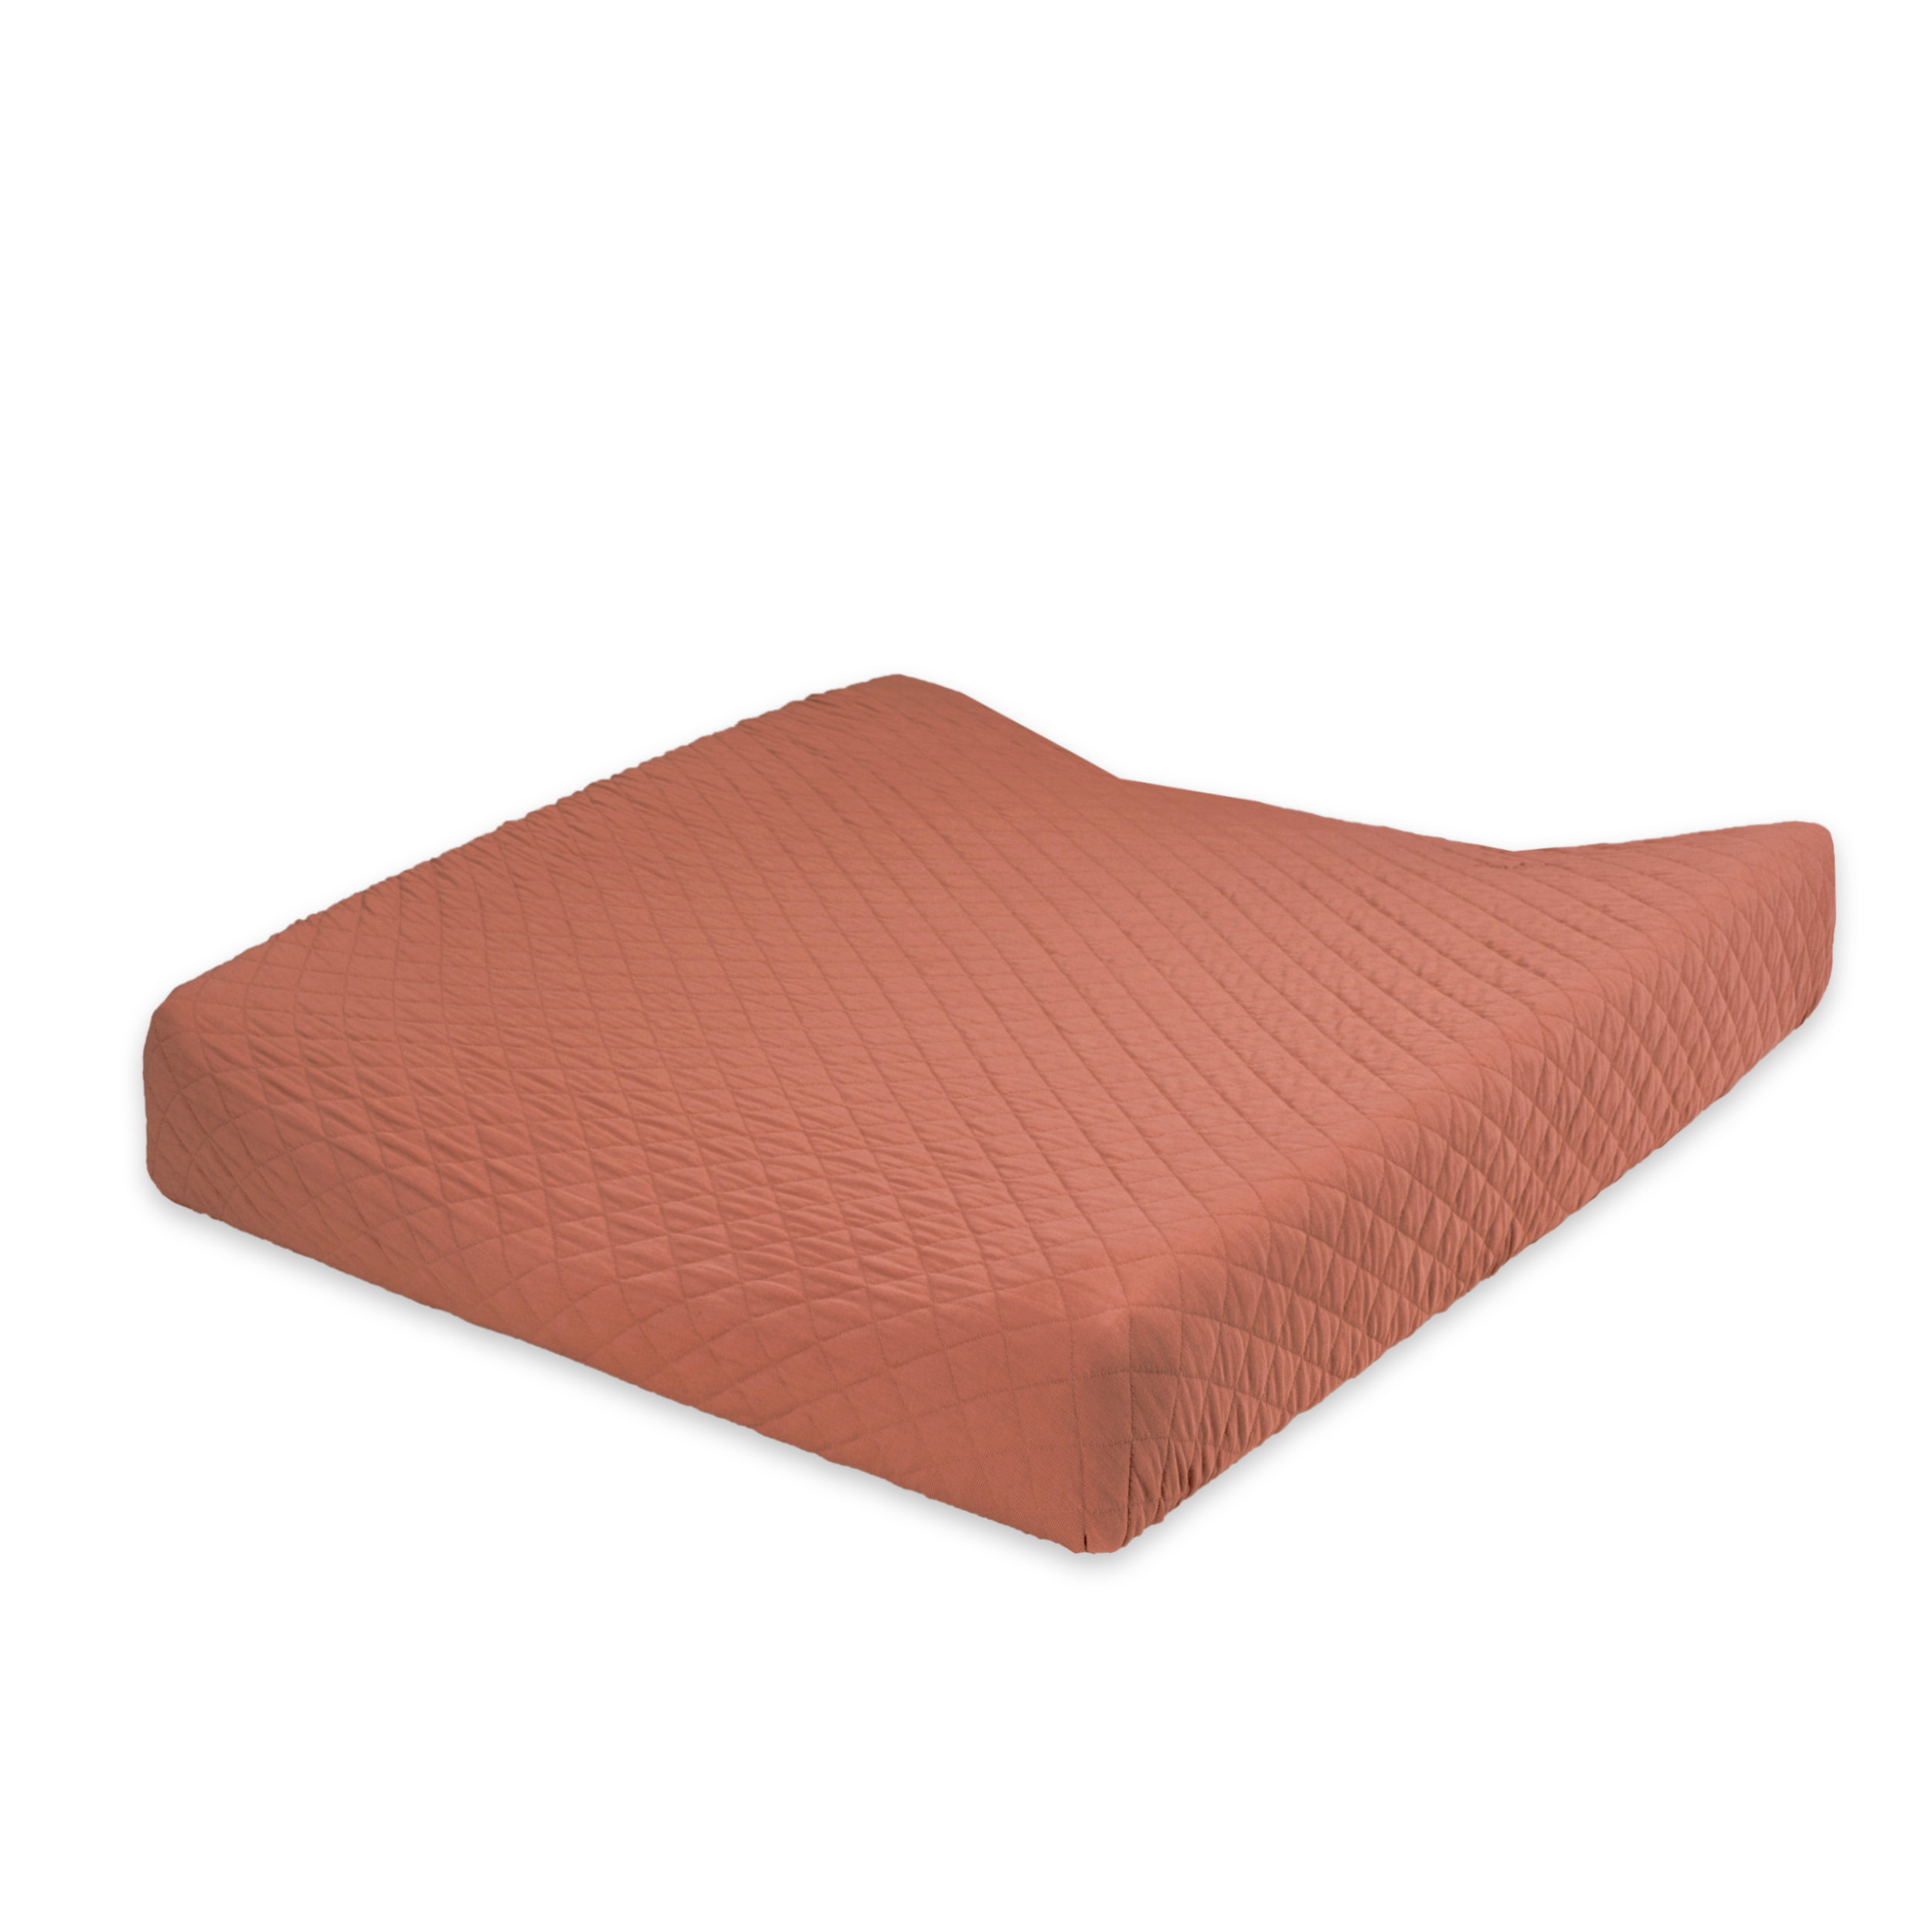 Funda protector cambiador Pady quilted jersey 50x75cm QUILT Brick